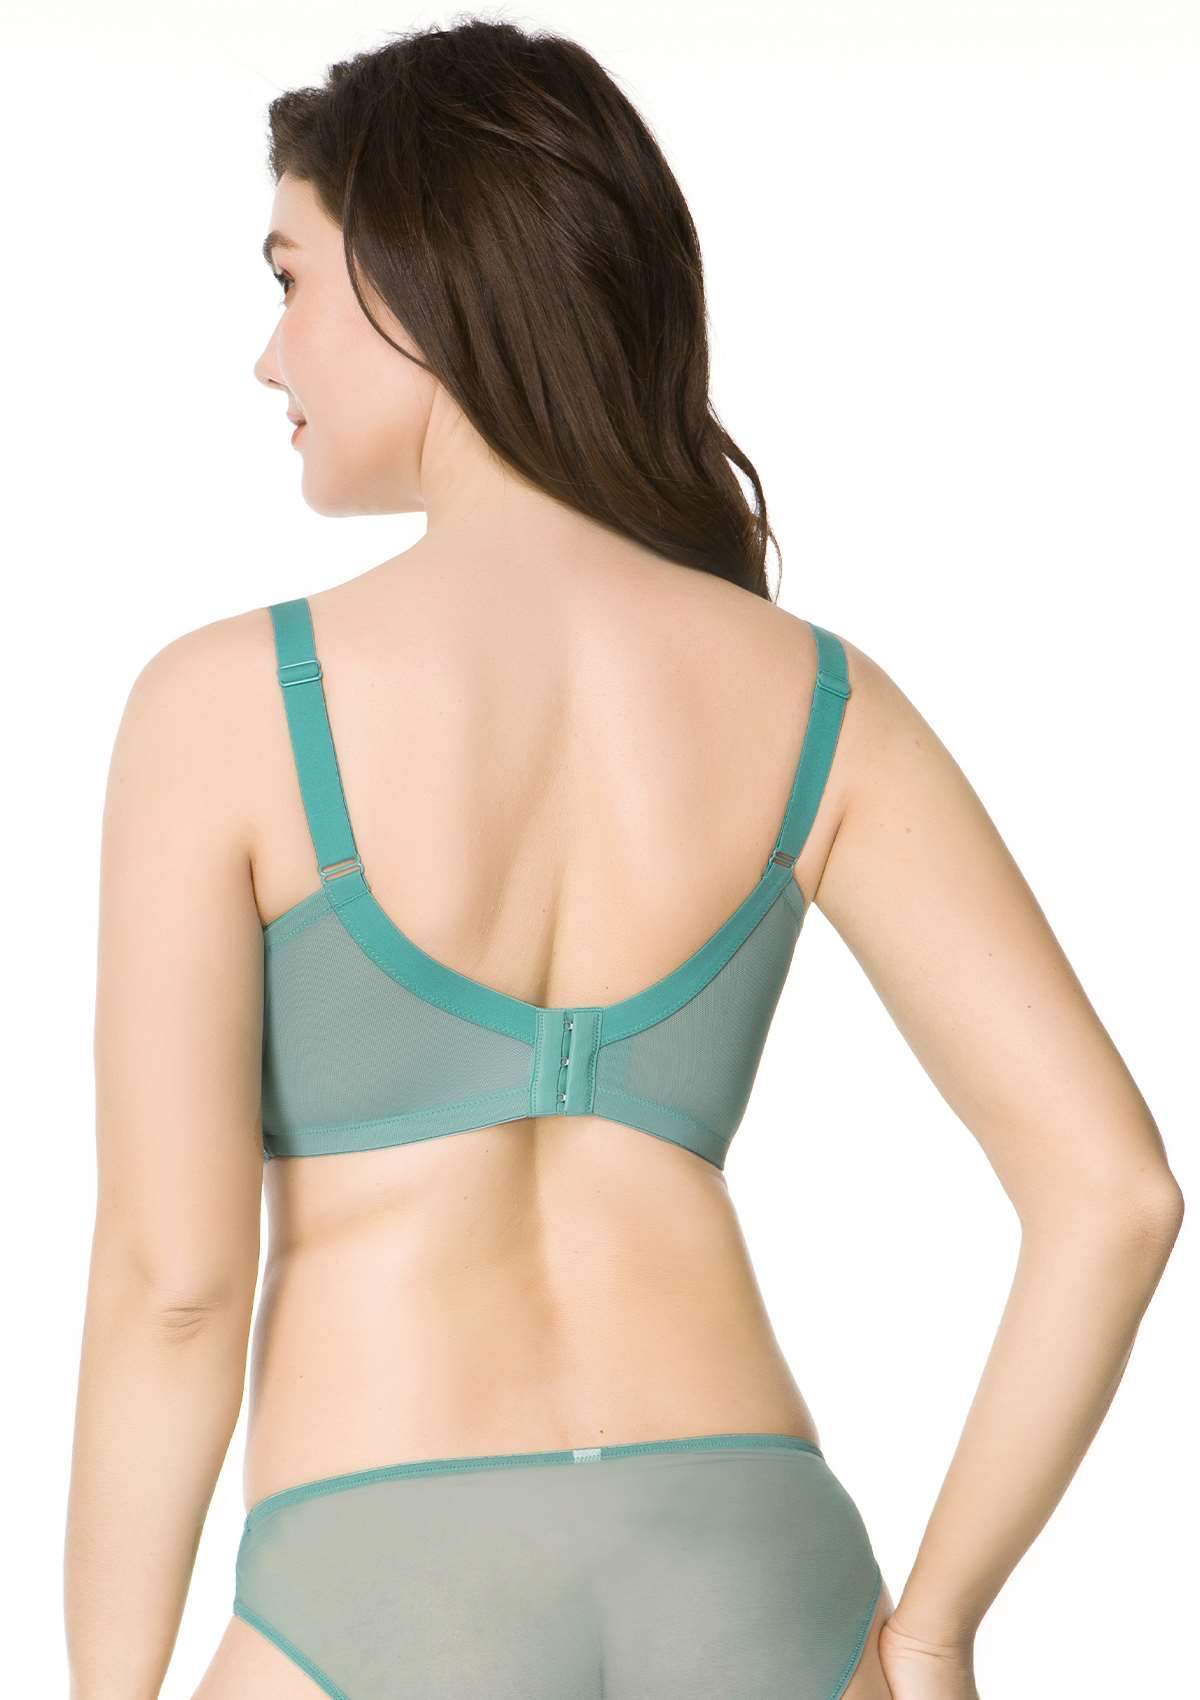 HSIA Paeonia Lace Full Coverage Underwire Non-Padded Uplifting Bra - Teal / 40 / DDD/F